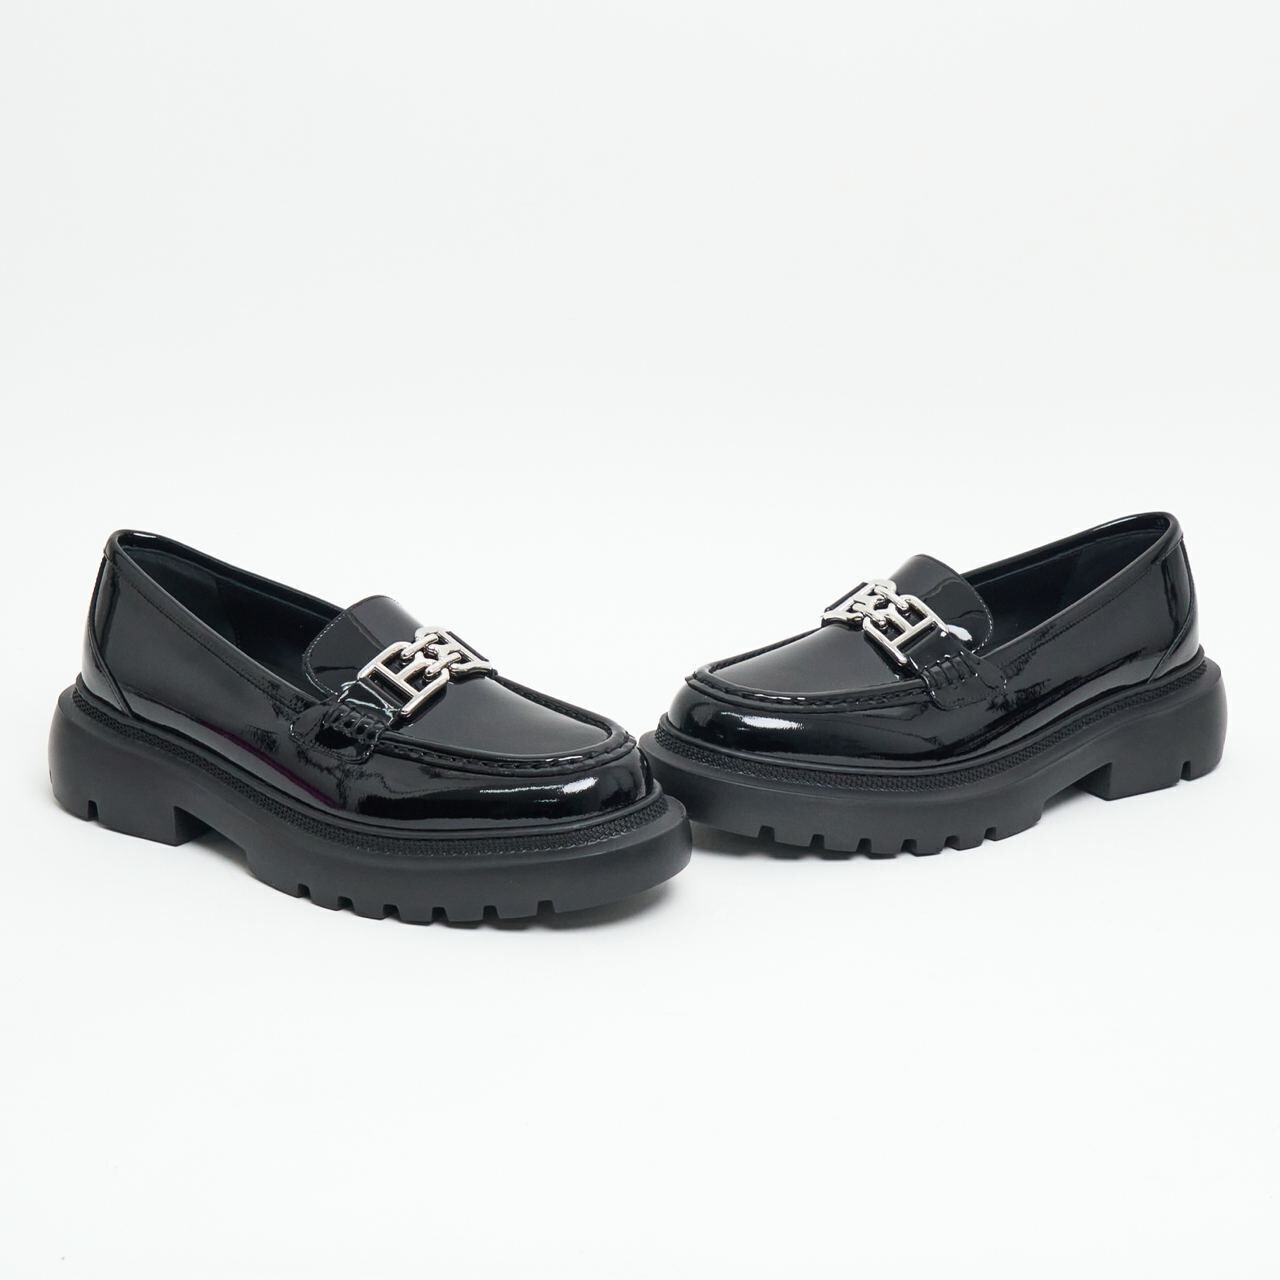 Bally Gioia Chunky Patent Leather Loafers Black Shw